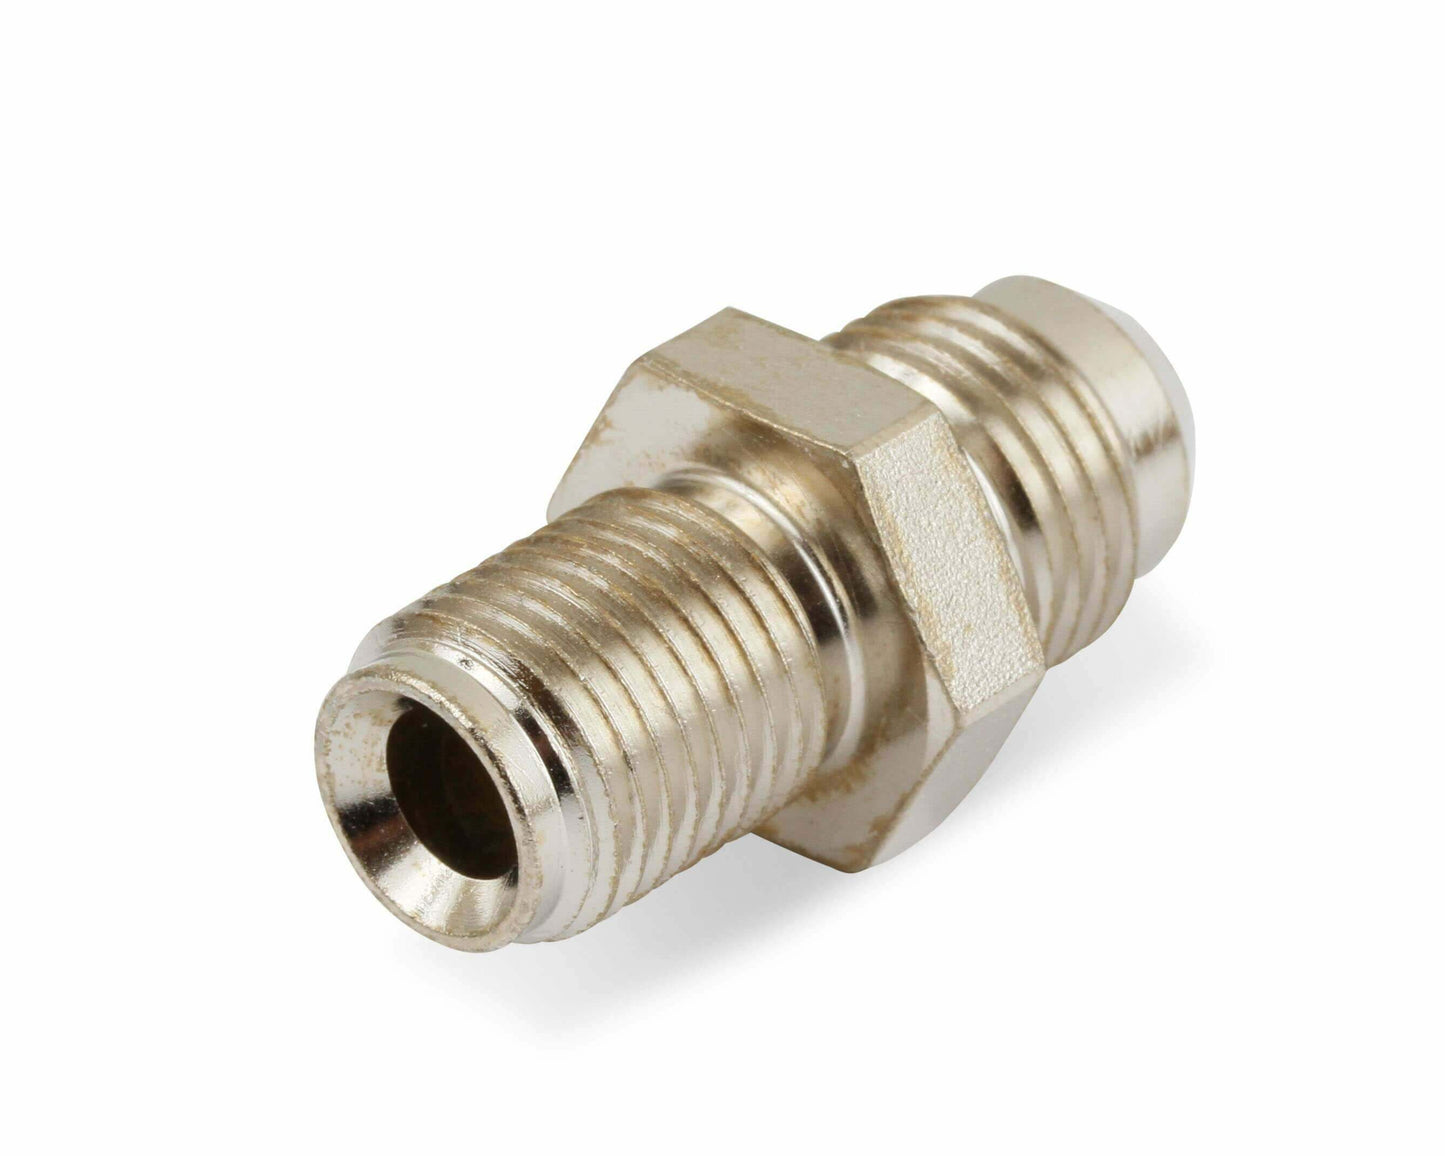 Earls Inverted Flare to AN Adapter Fitting - 961946LERL